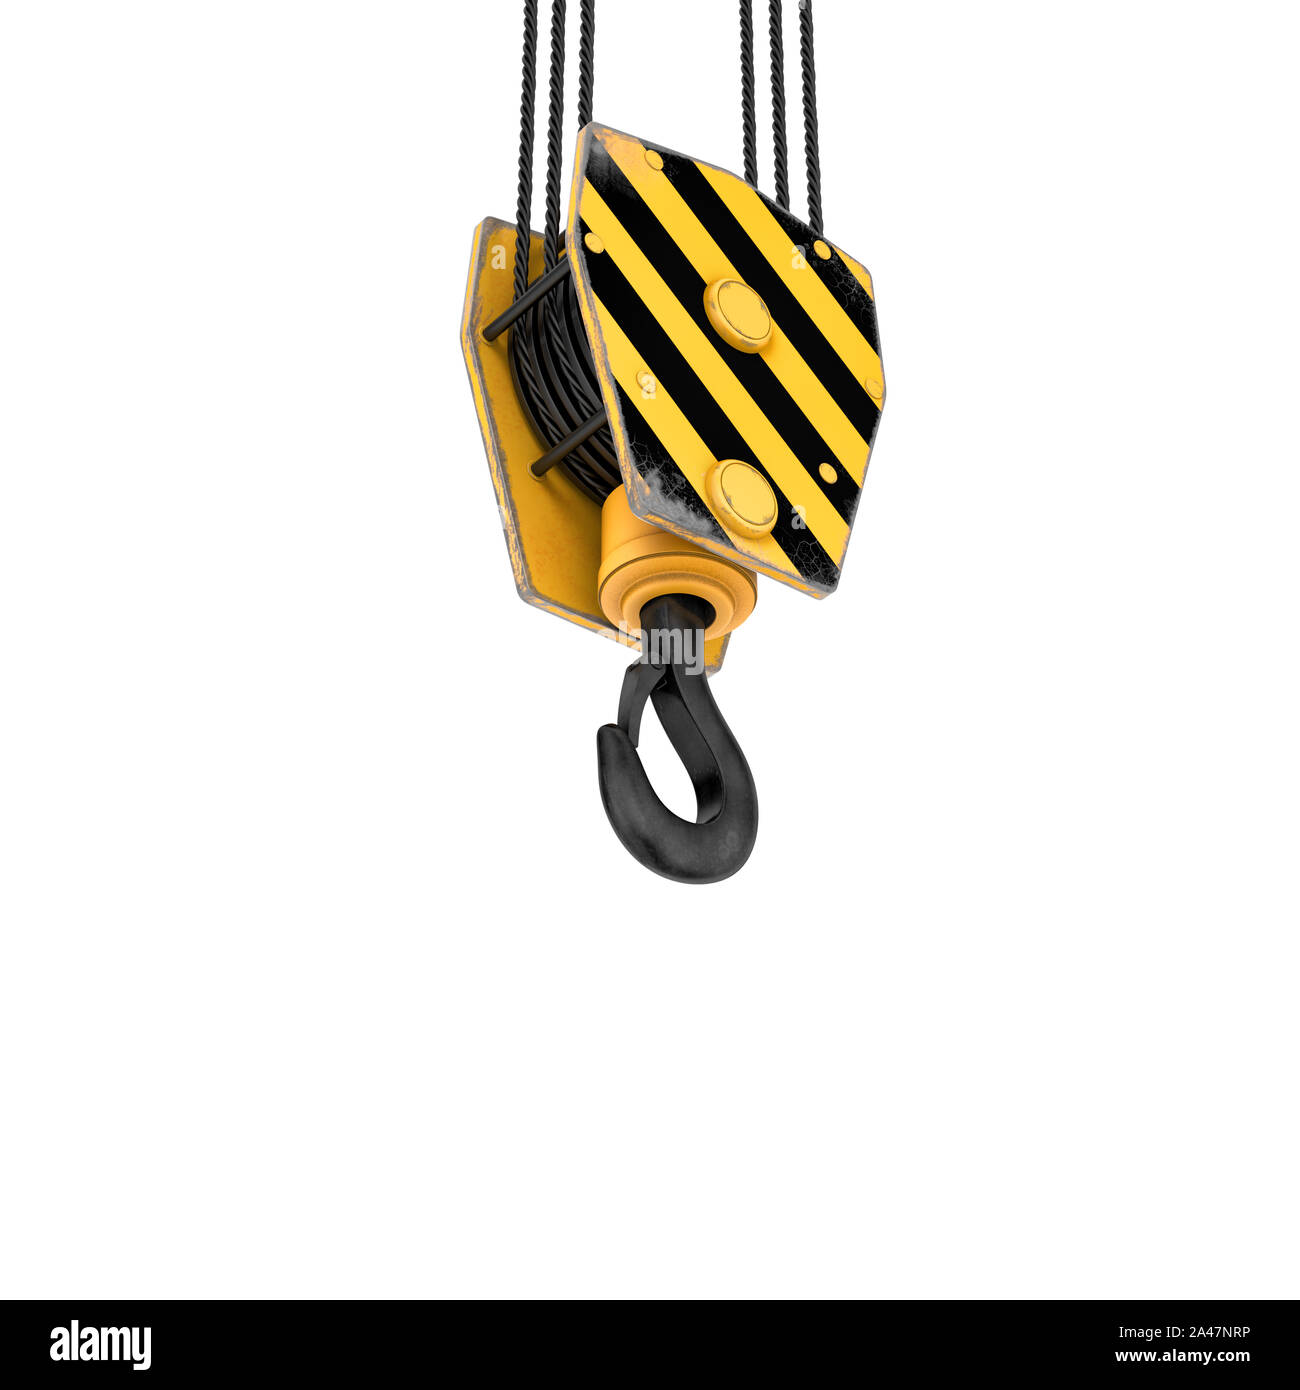 https://c8.alamy.com/comp/2A47NRP/3d-rendering-of-a-tower-crane-hook-isolated-on-the-white-background-building-and-construction-machinery-and-equipment-2A47NRP.jpg